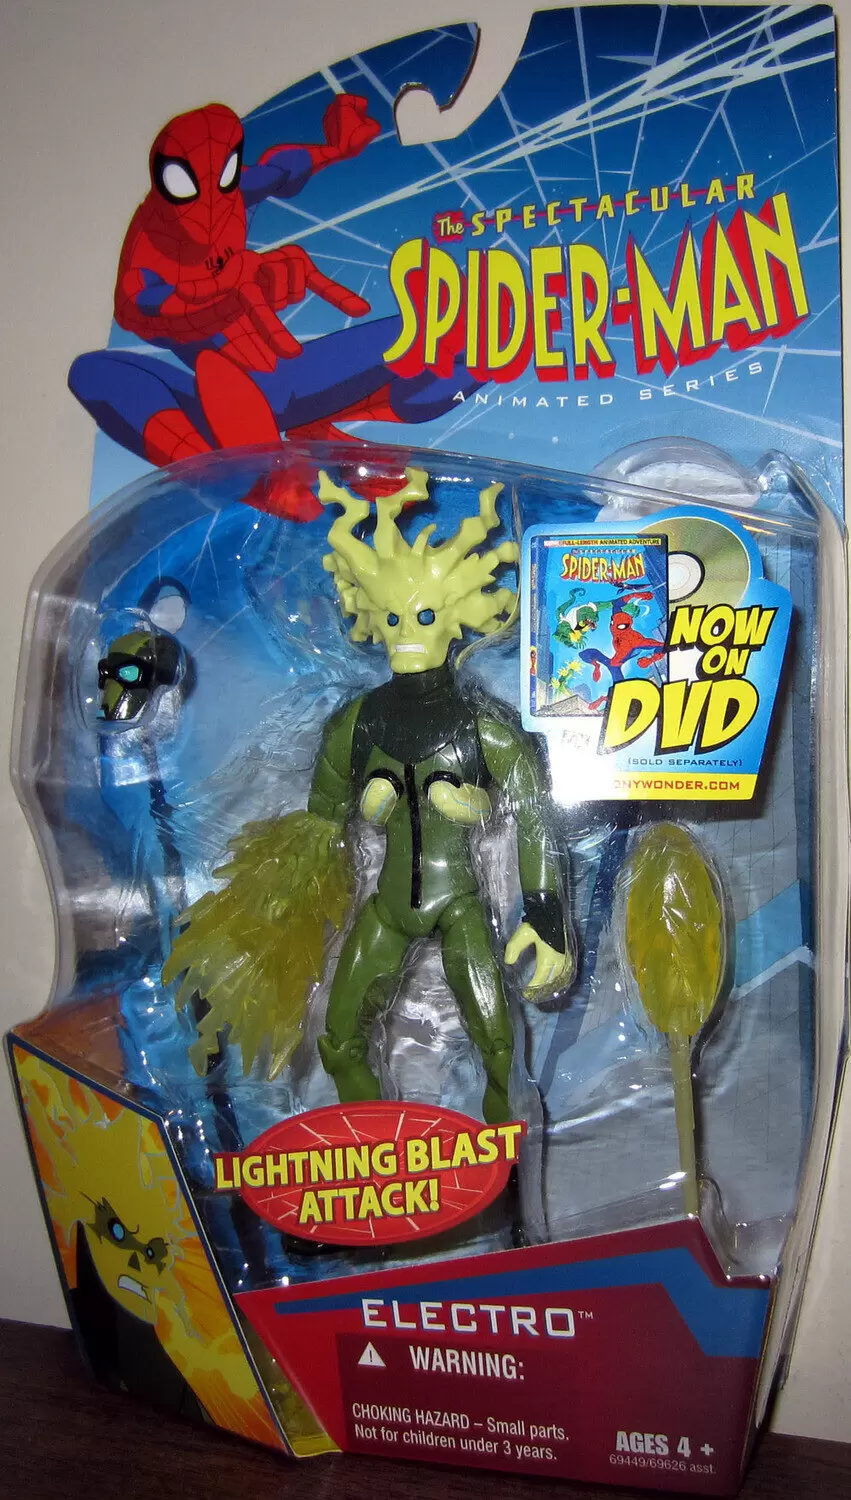 The Spectacular Spider-Man Action Figures - Electro Lightning Blast Attack